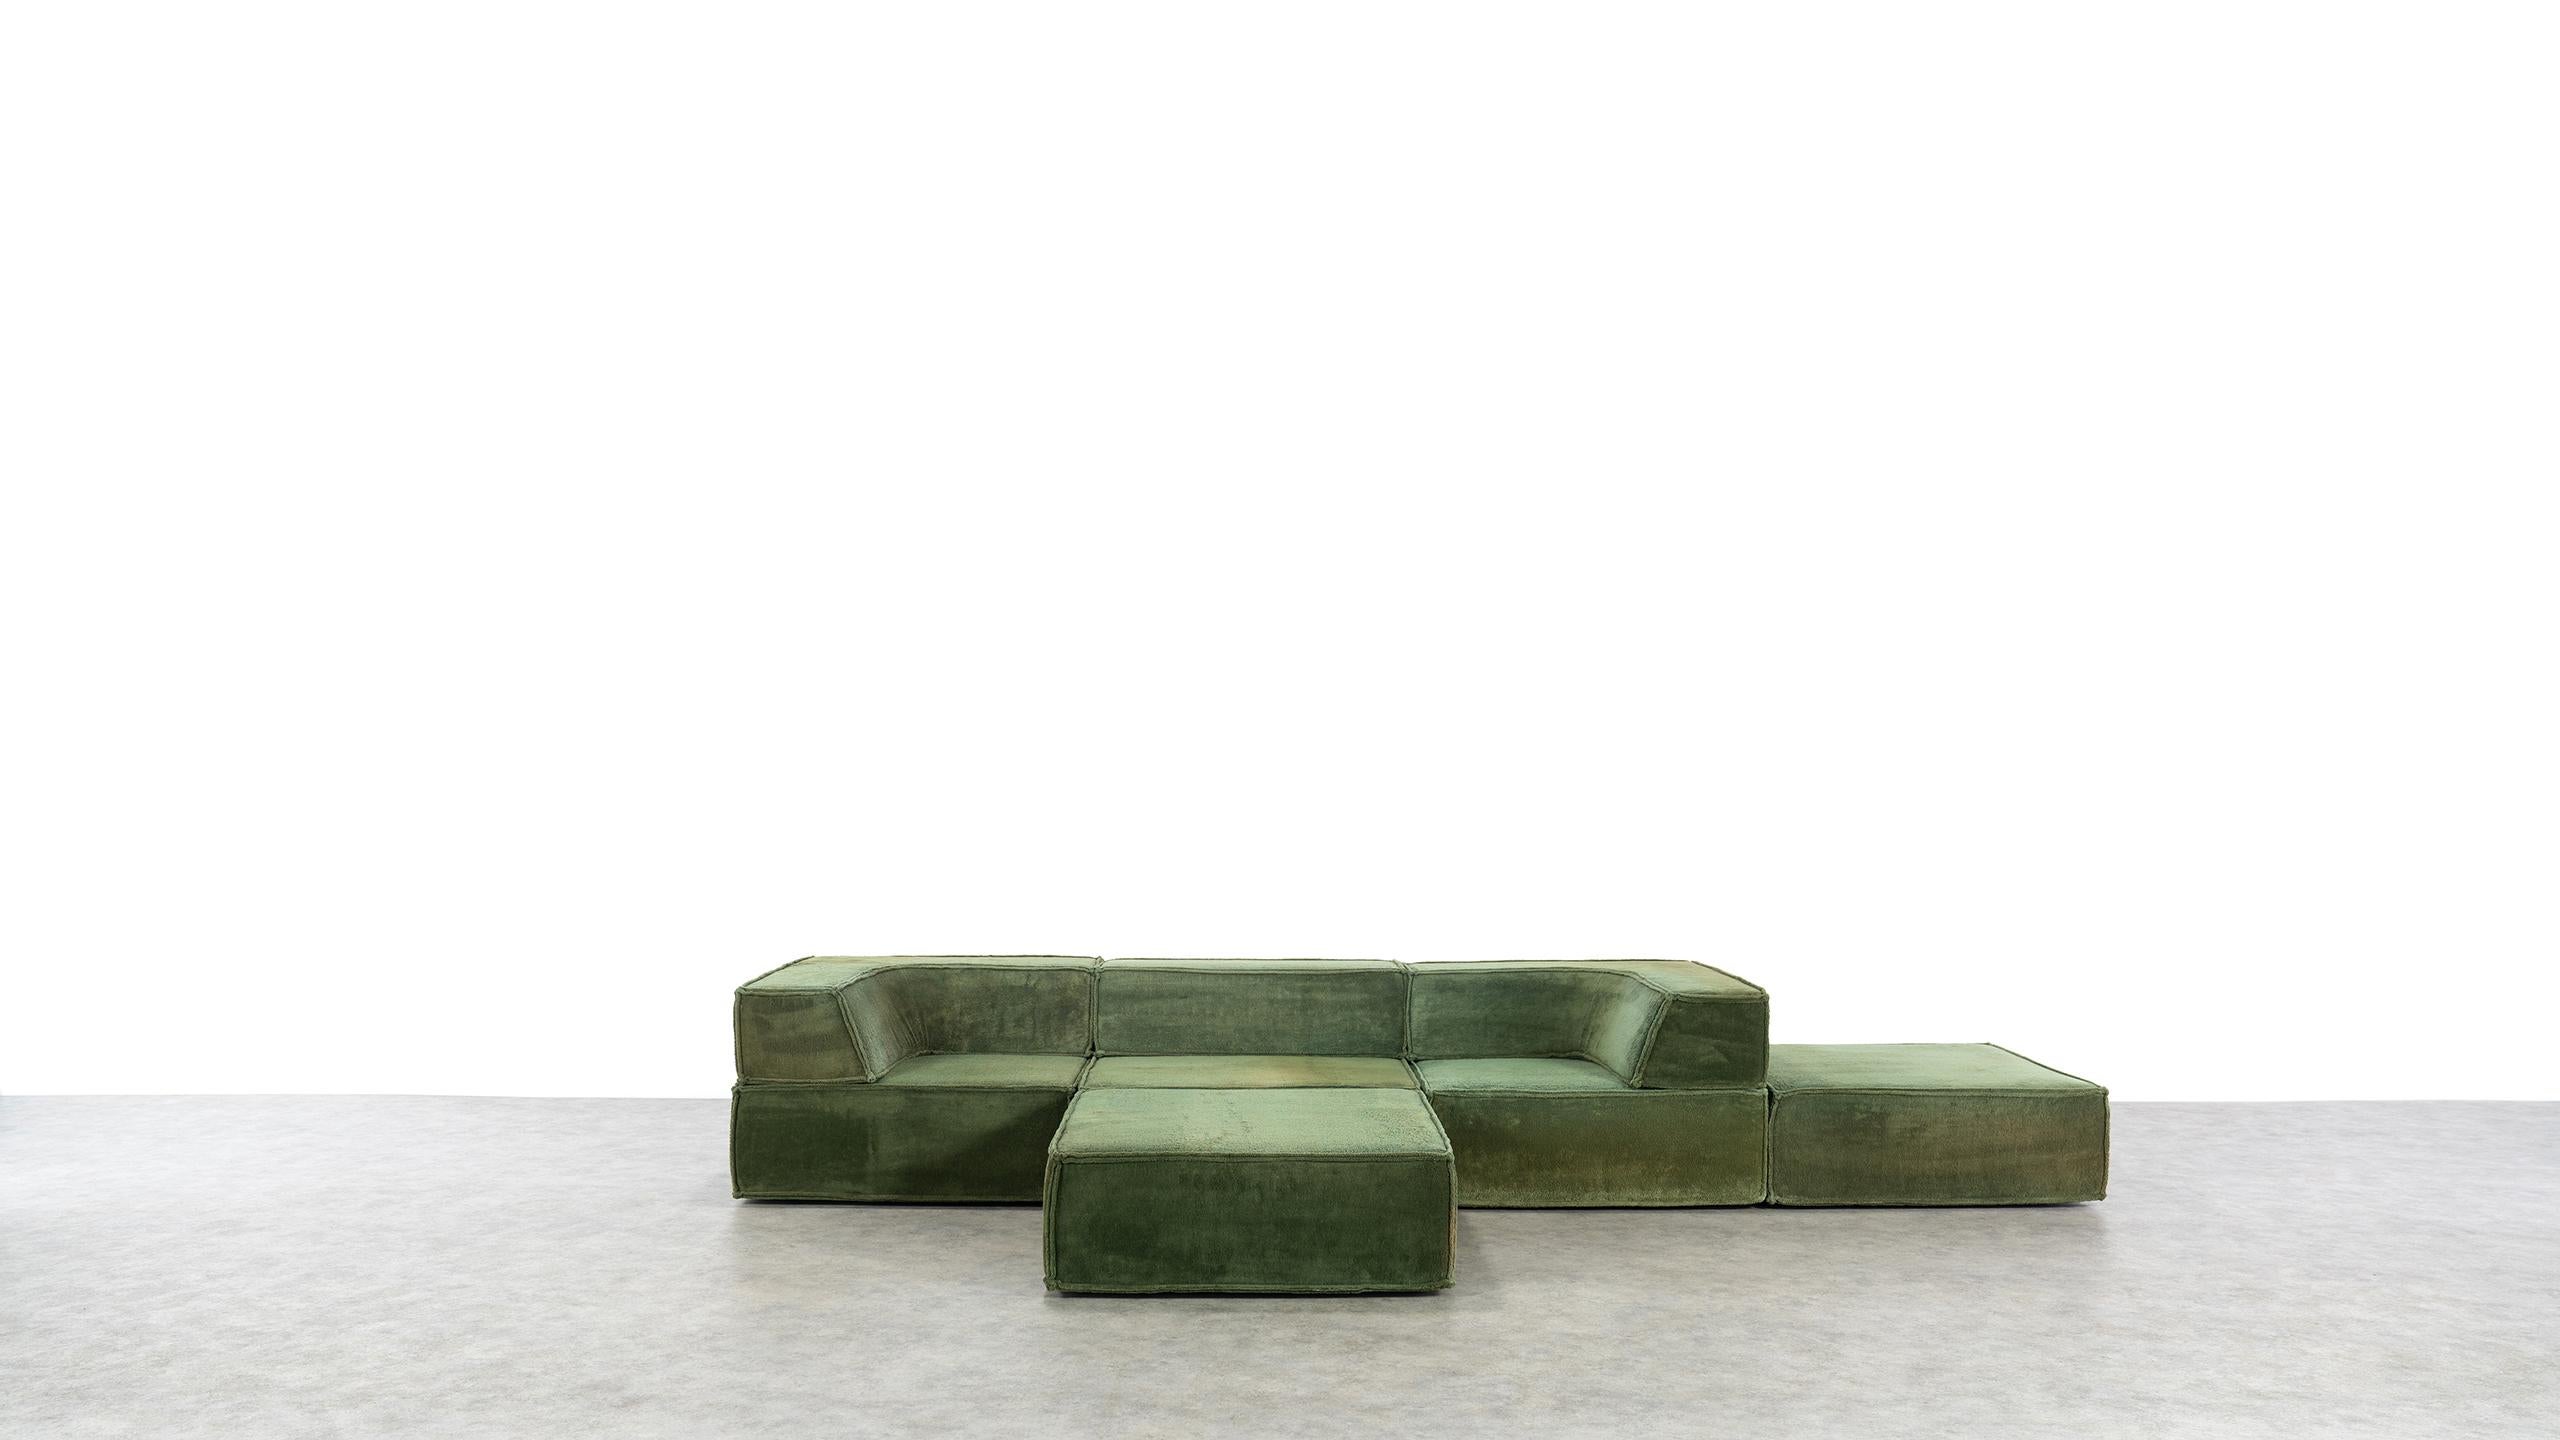 Fabric COR Trio Modular Sofa, Giant Landscape in Green, 1972 by Team Form AG, Swiss